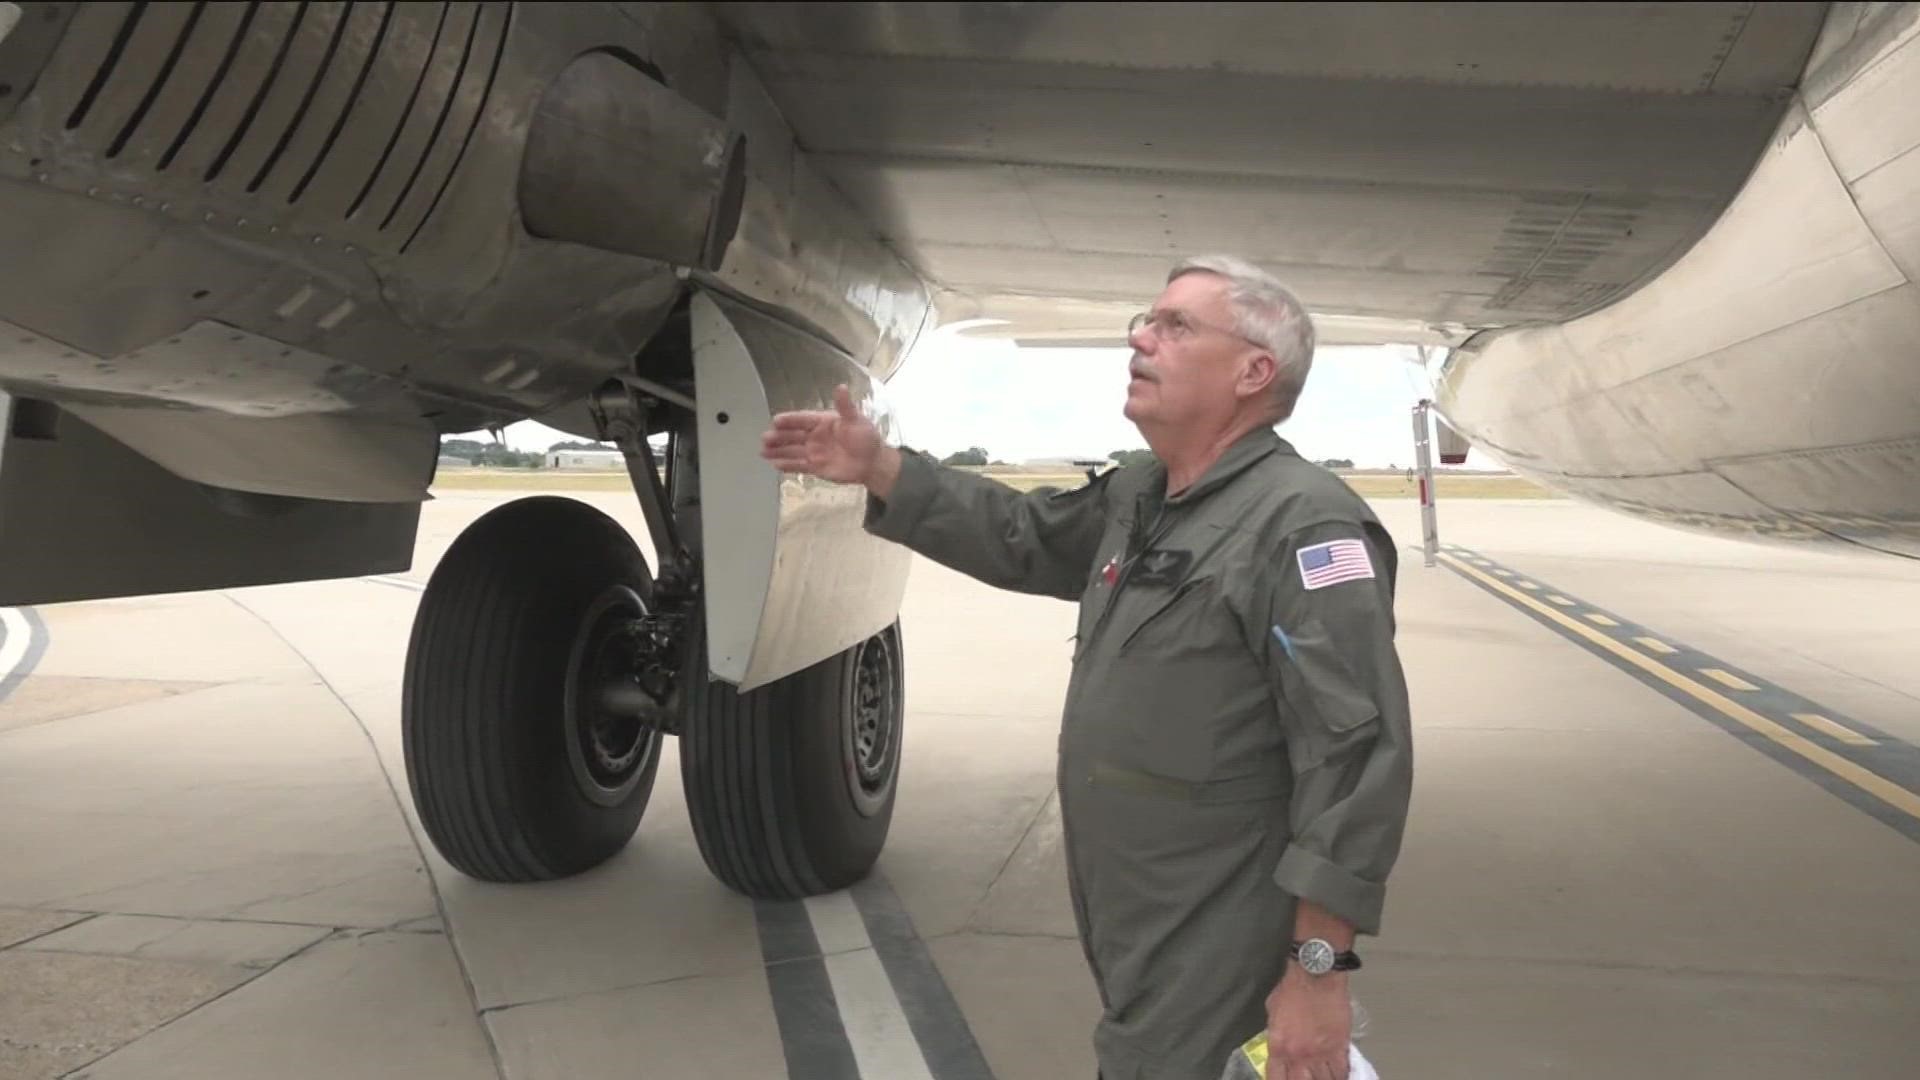 CBS19 got a special tour of a B-29 Bomber, just one of two flying in the entire world